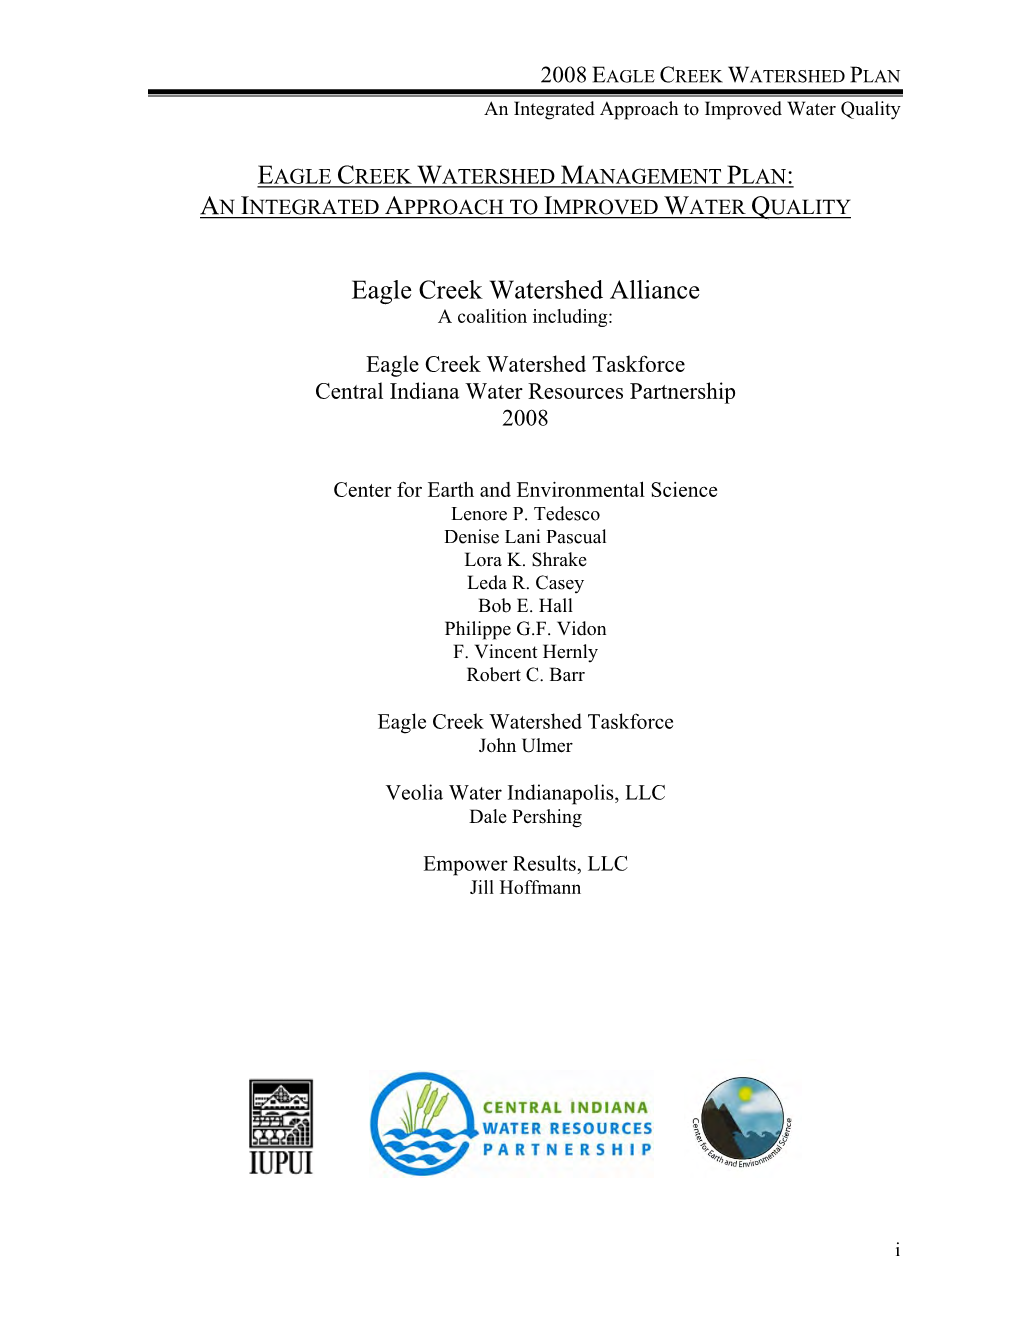 Eagle Creek Watershed Management Plan: an Integrated Approach to Improved Water Quality